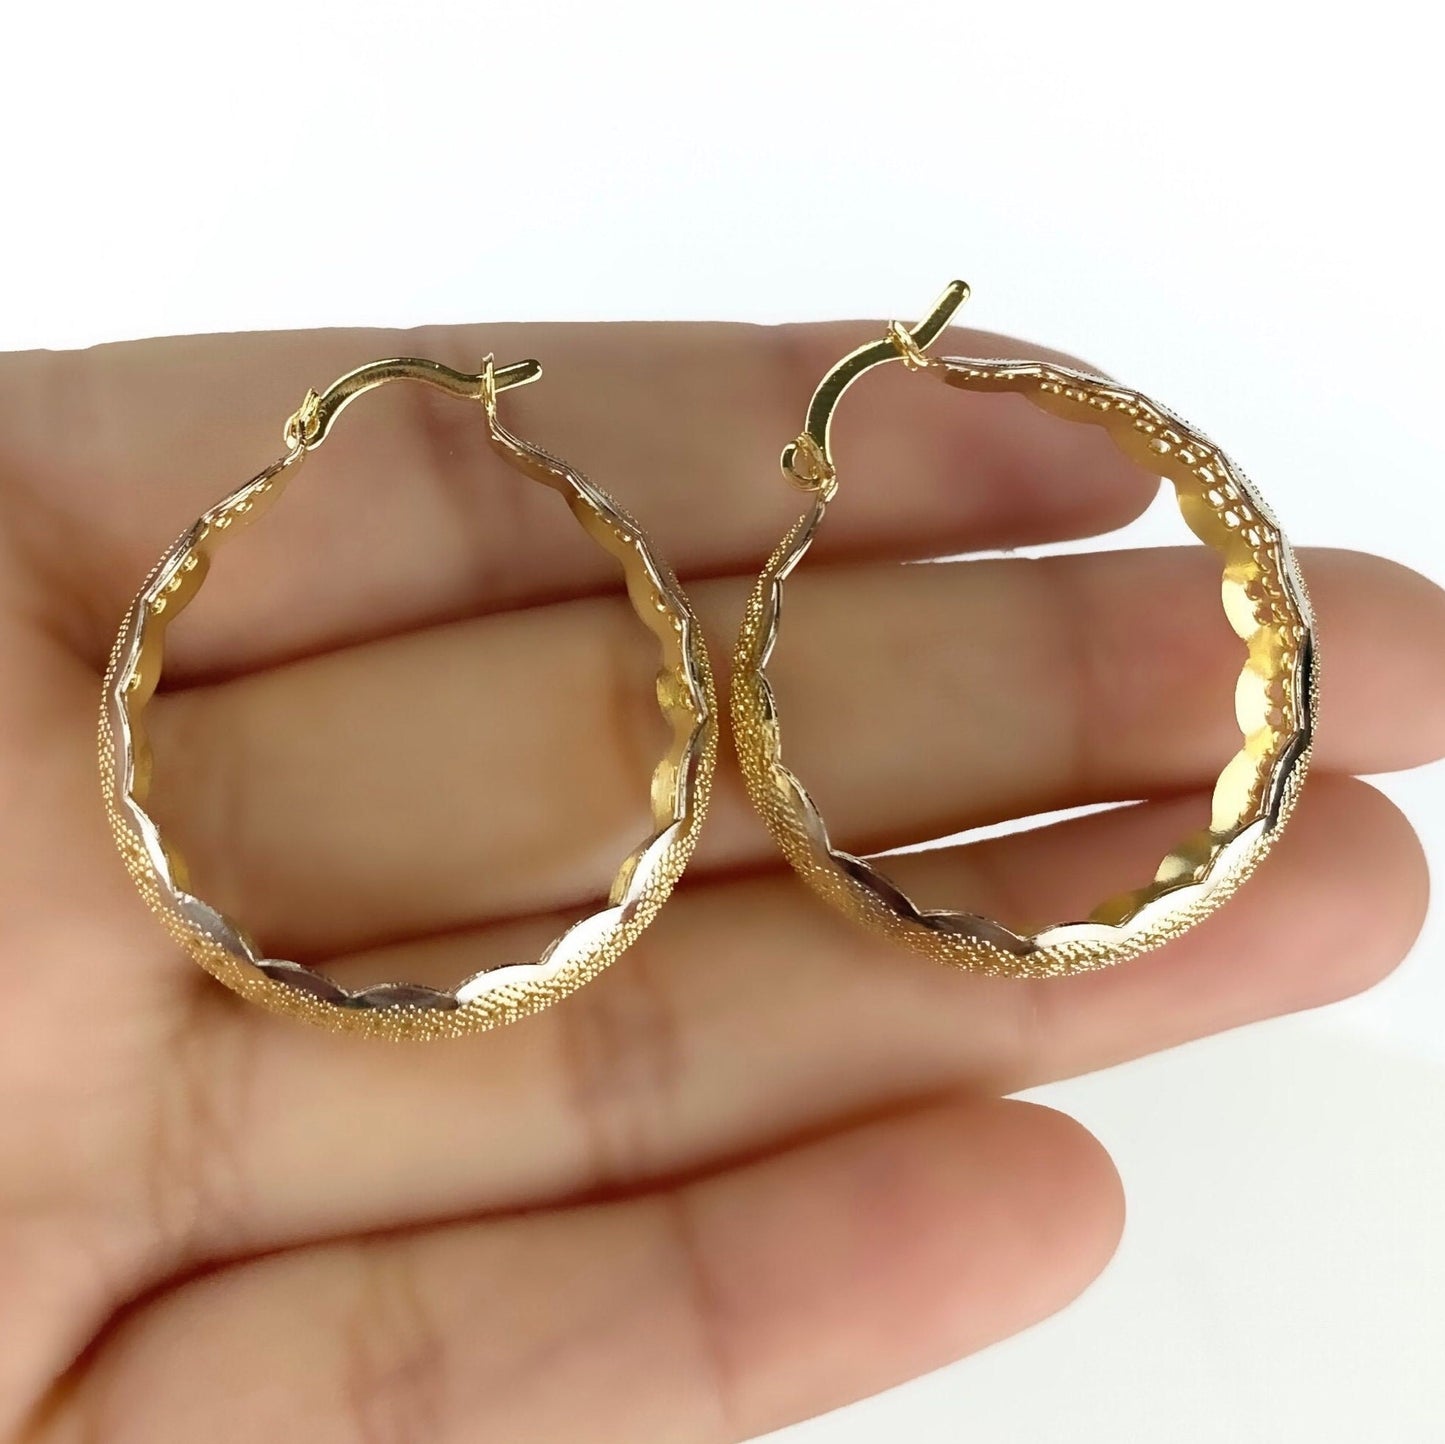 18k Gold Filled 27mm Hoop Earrings, Two Tone with Lace Texture, Wholesale Jewelry Making Supplies